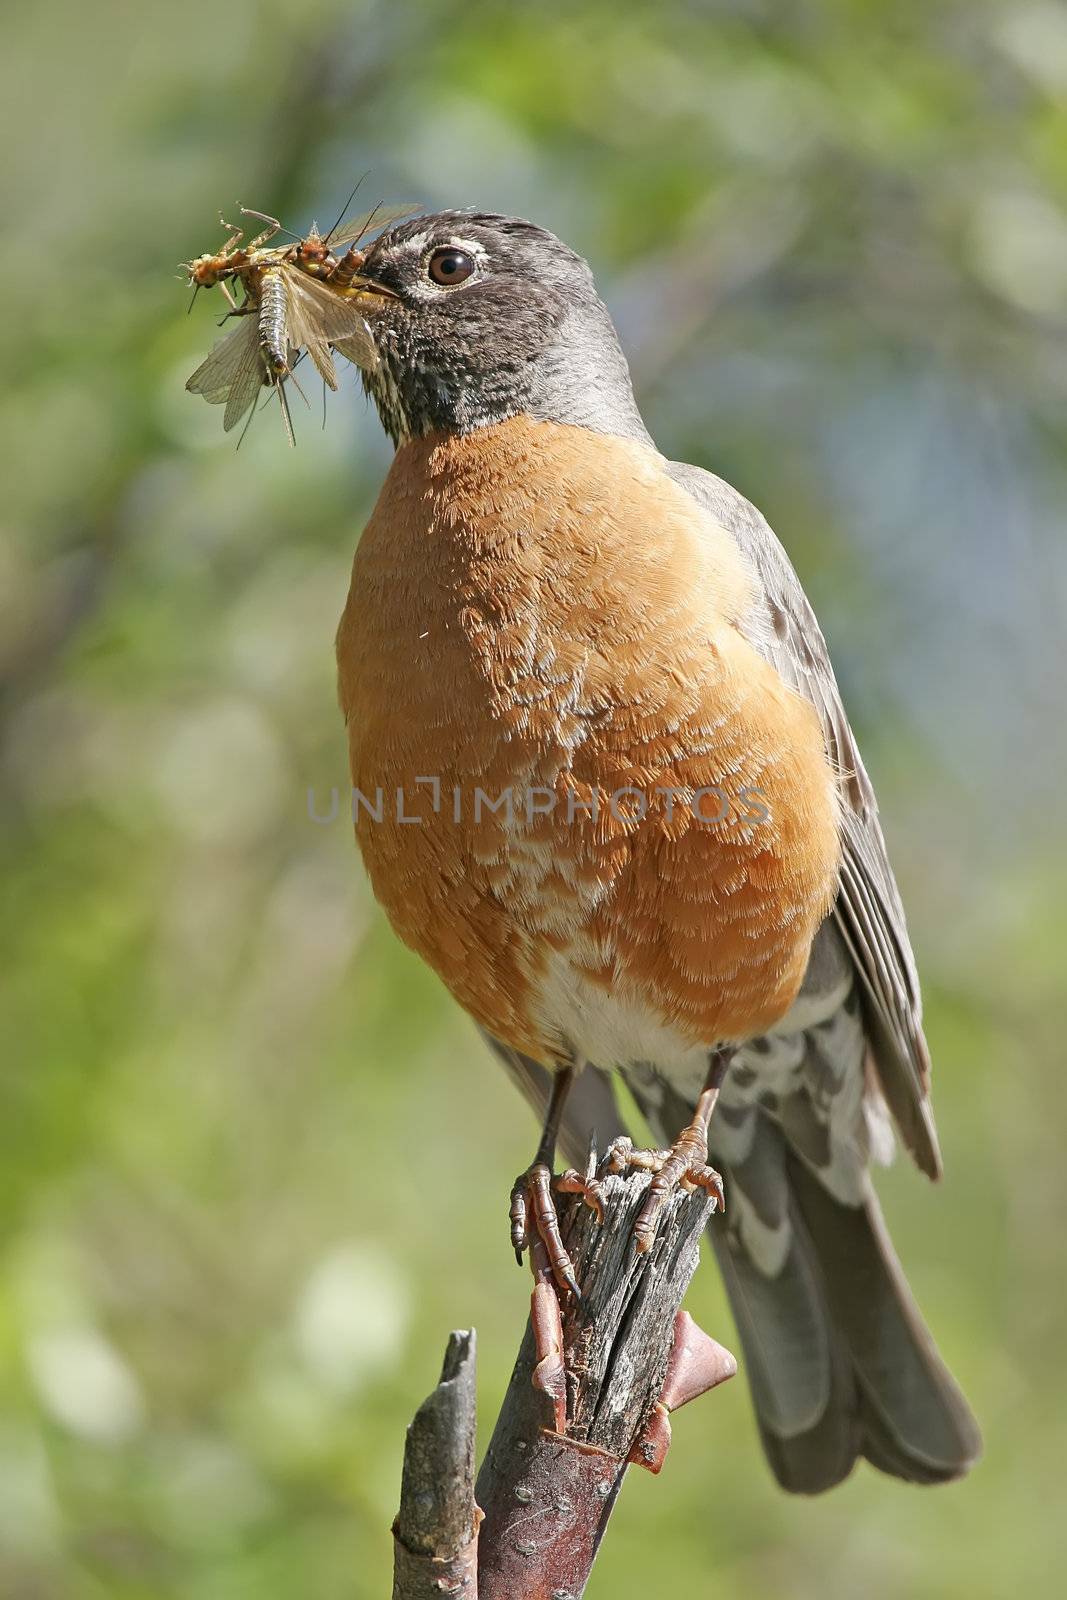 American Robin (Turdus migratorius) with insects in his beak